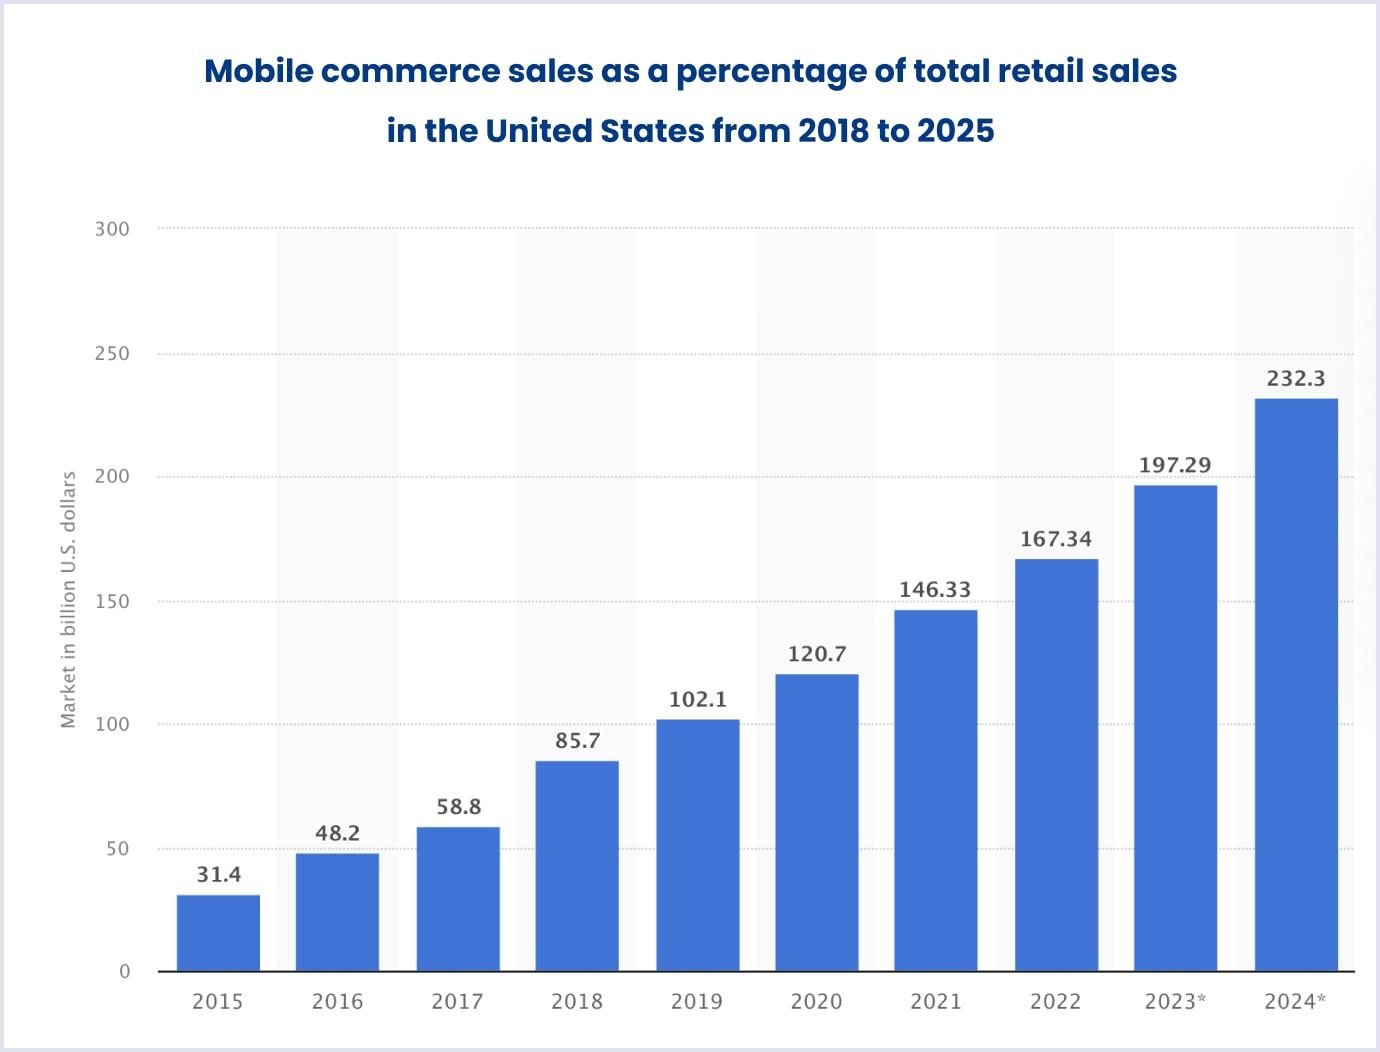 The percentage of mobile commerce sales from the total retail sales in the USA from 2018 to 2025